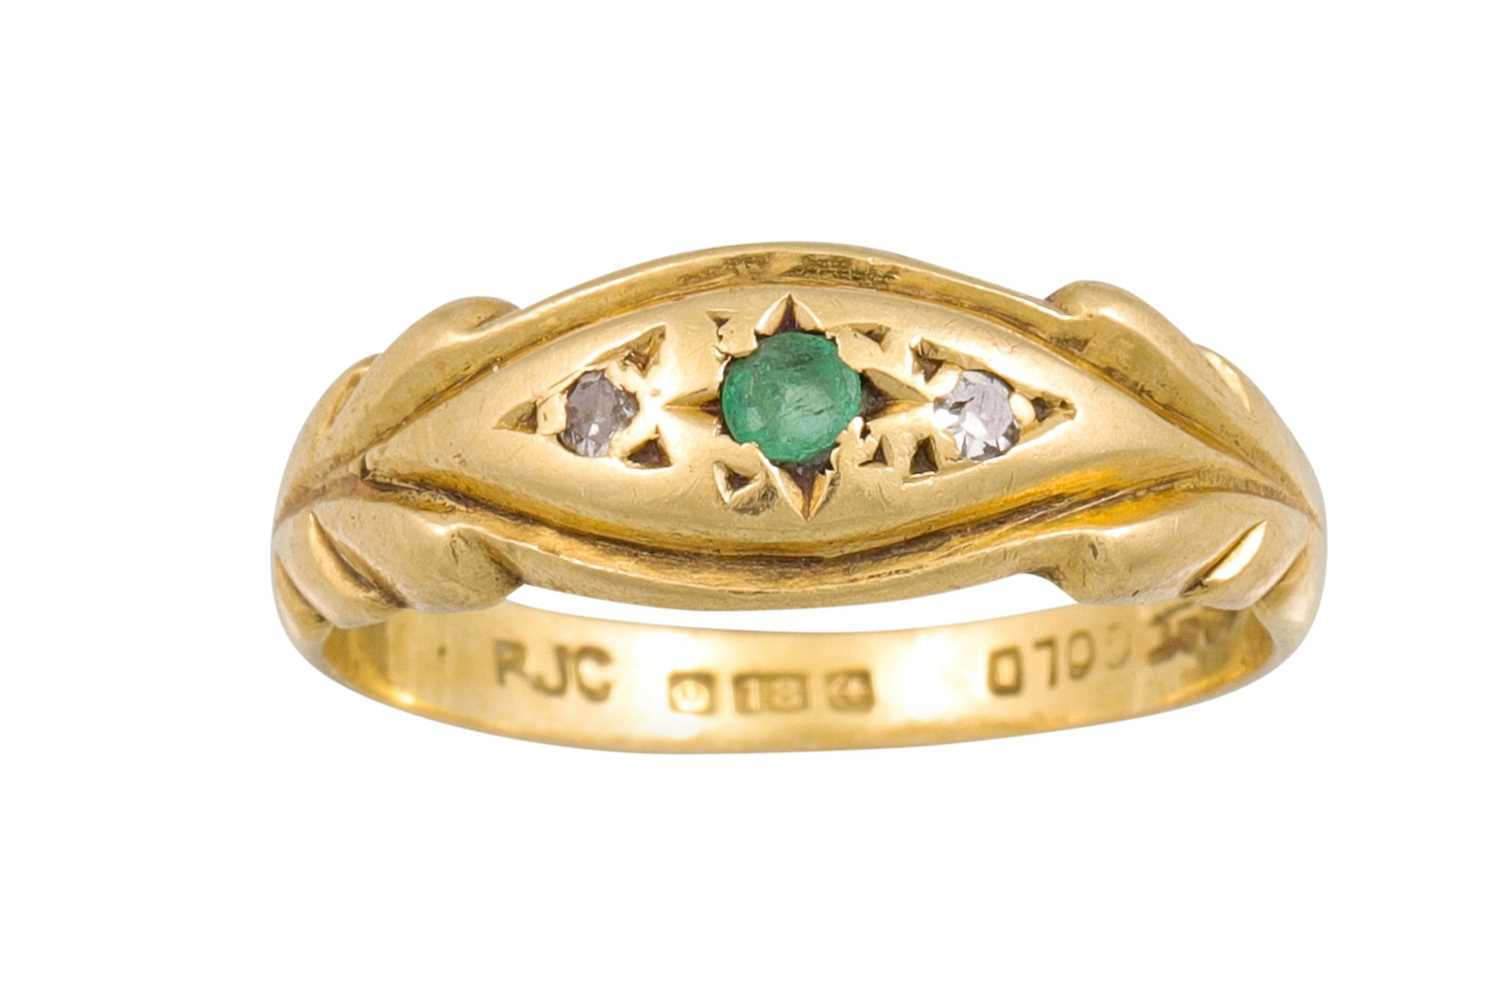 Lot 334 - A VINTAGE 18CT GOLD RING, set with an